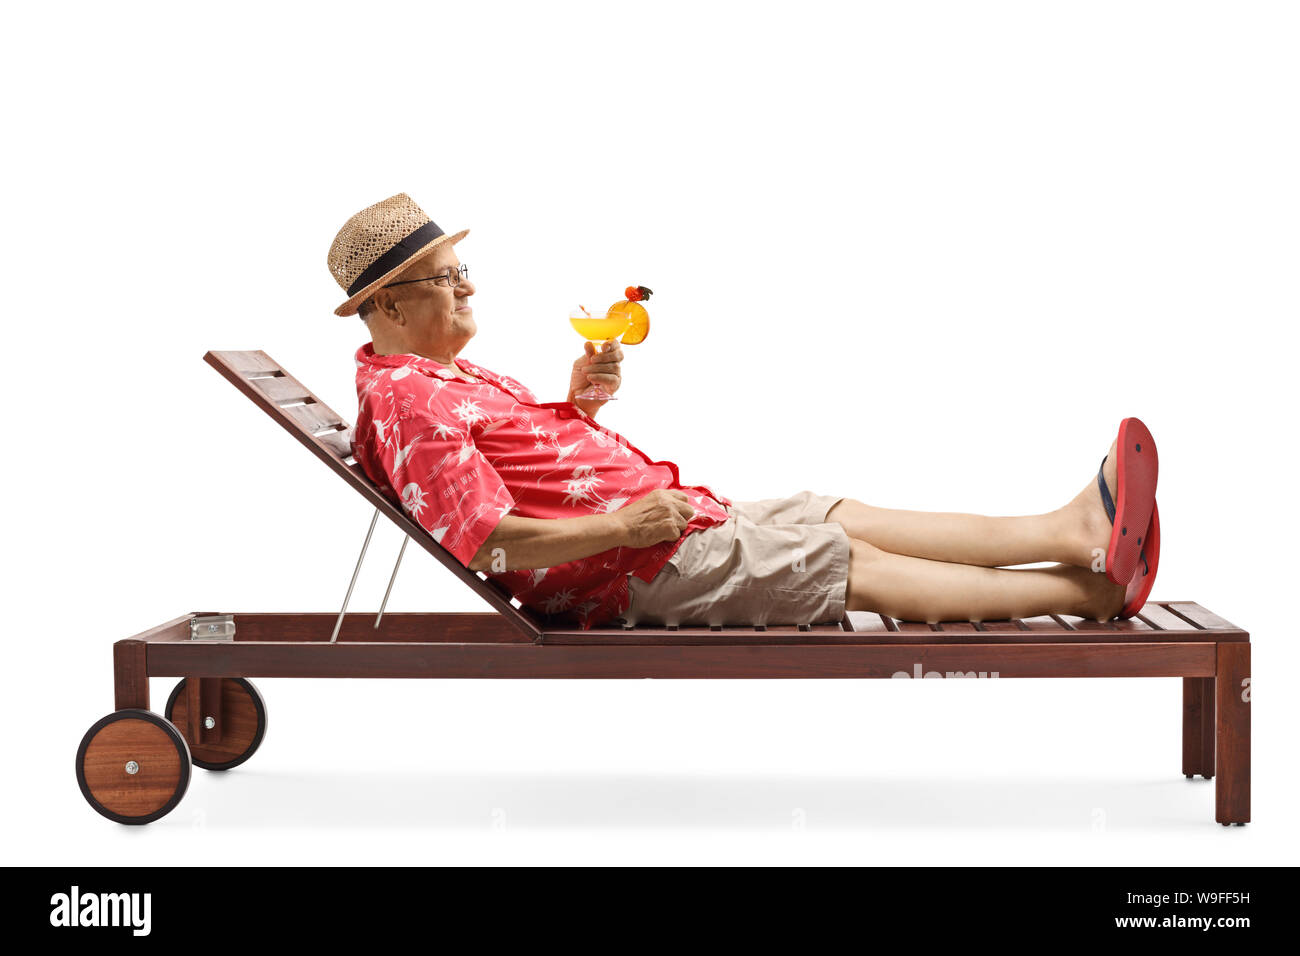 Full length profile shot of a mature man holding a cocktail and relaxing on beach bed isolated on white background Stock Photo